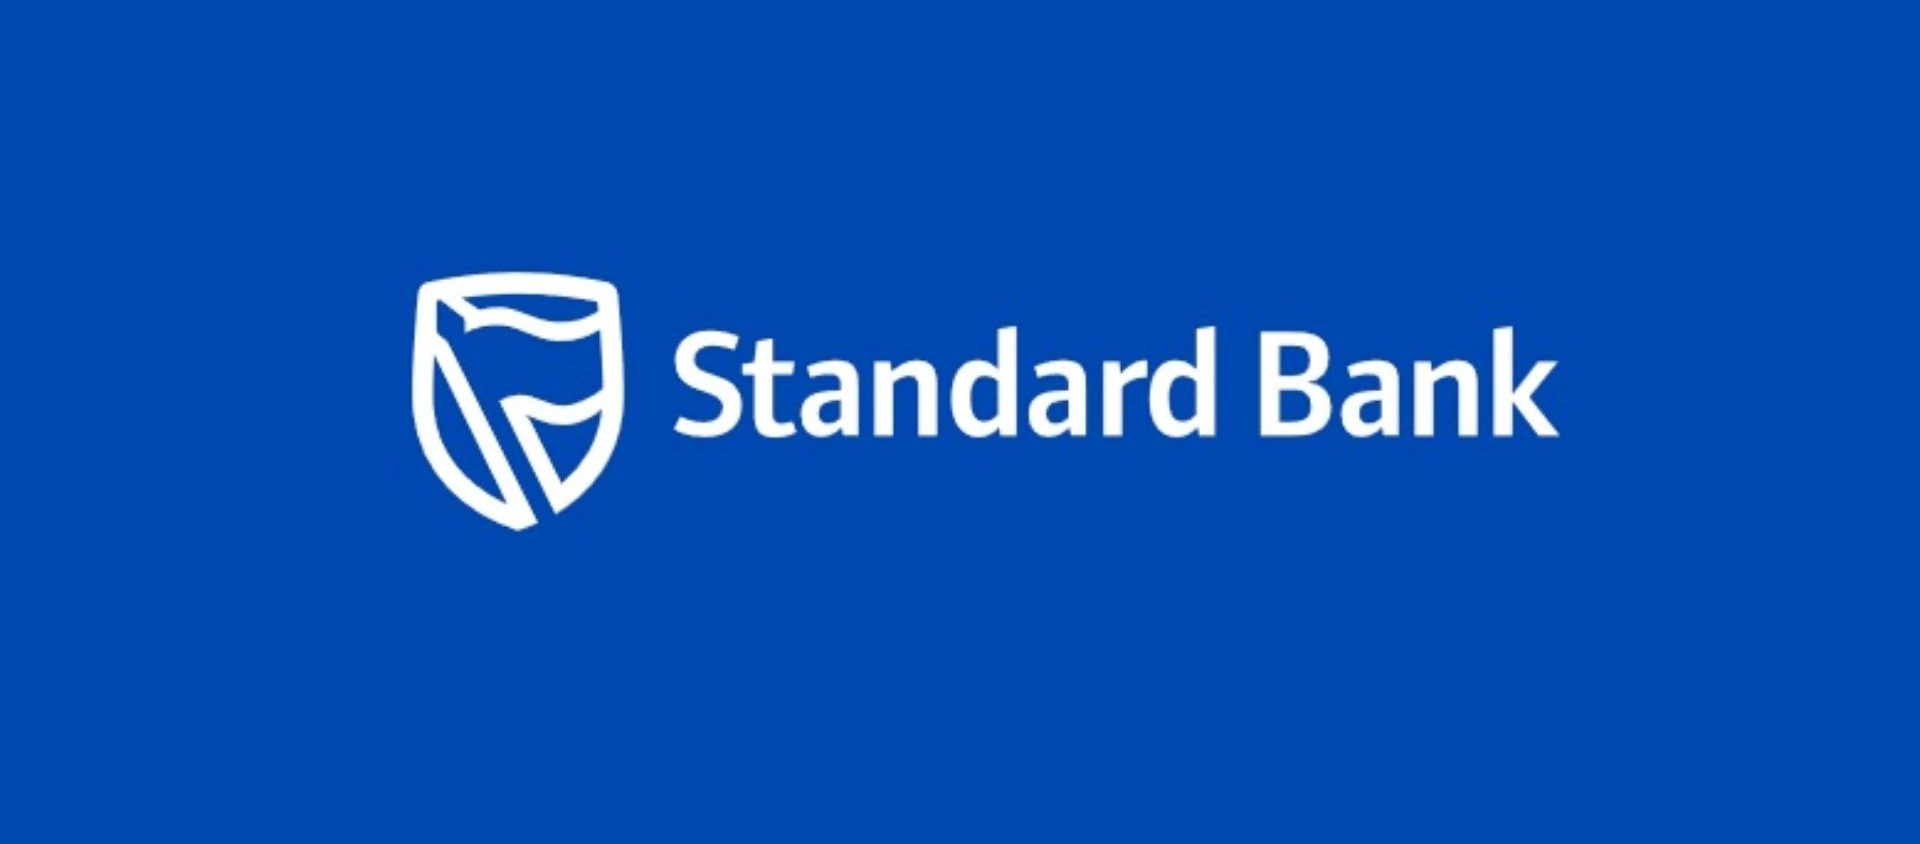 Standard Bank flew the flag this quarter